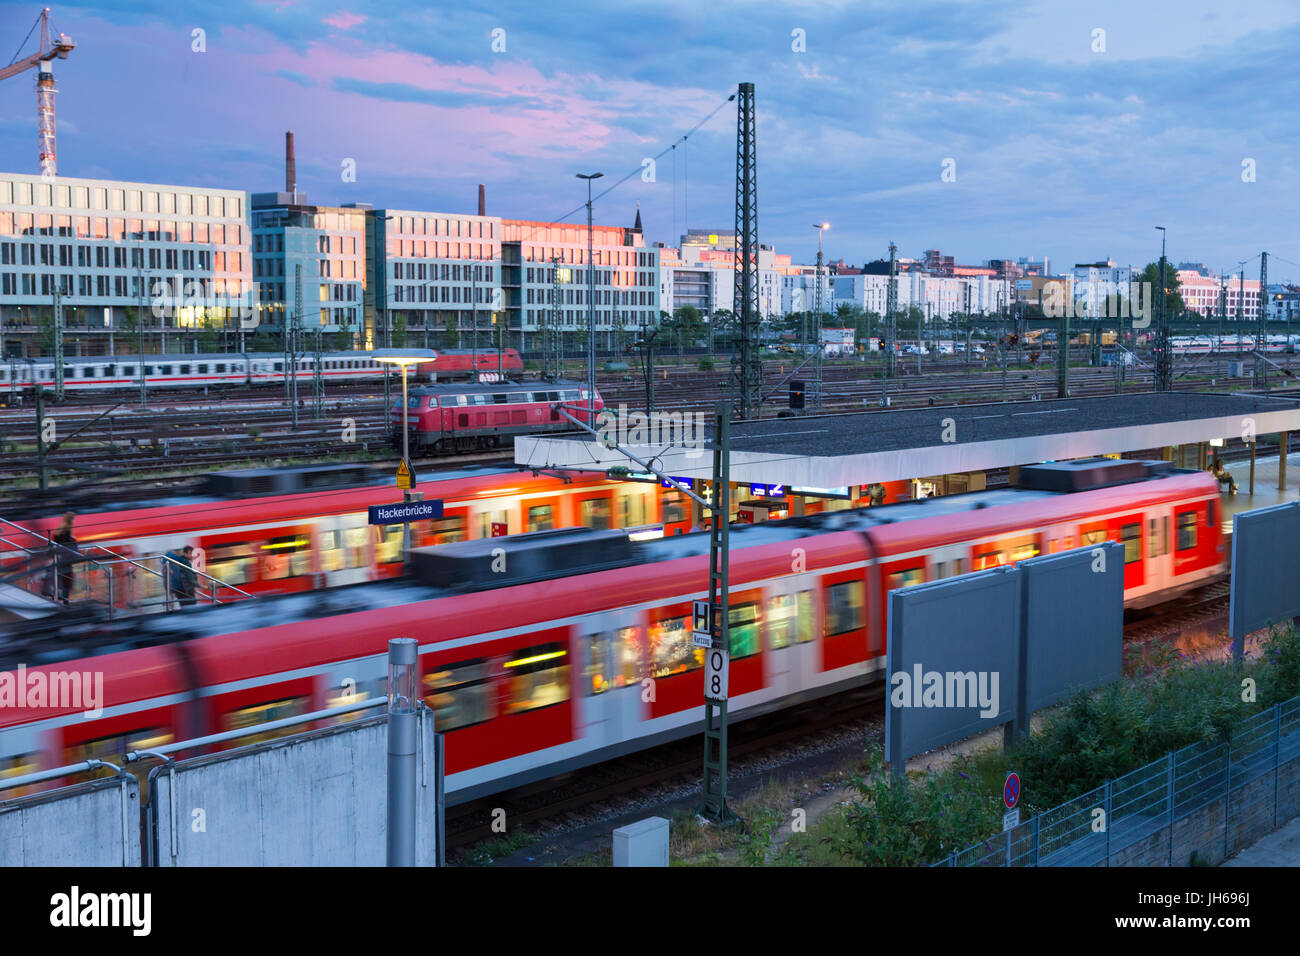 Railway with trains on Hackerbrucke train and S-bahn station in Munich, Germany Stock Photo